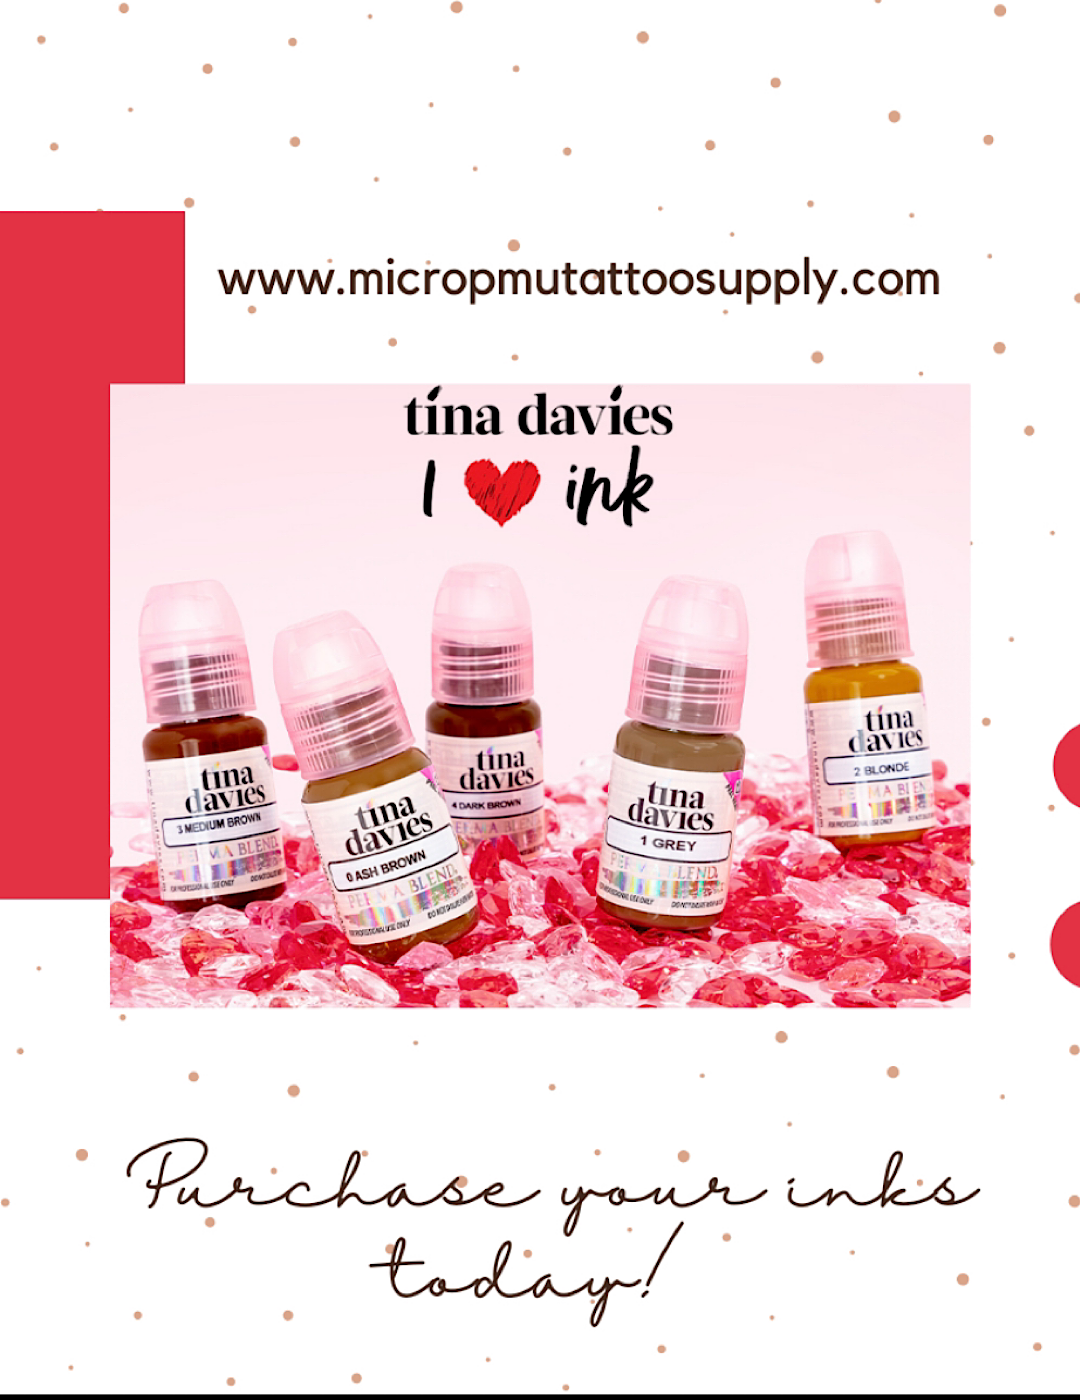 Tina Davies Pigment Sets - How to choose the right color! MicroPmu Tattoo Supply